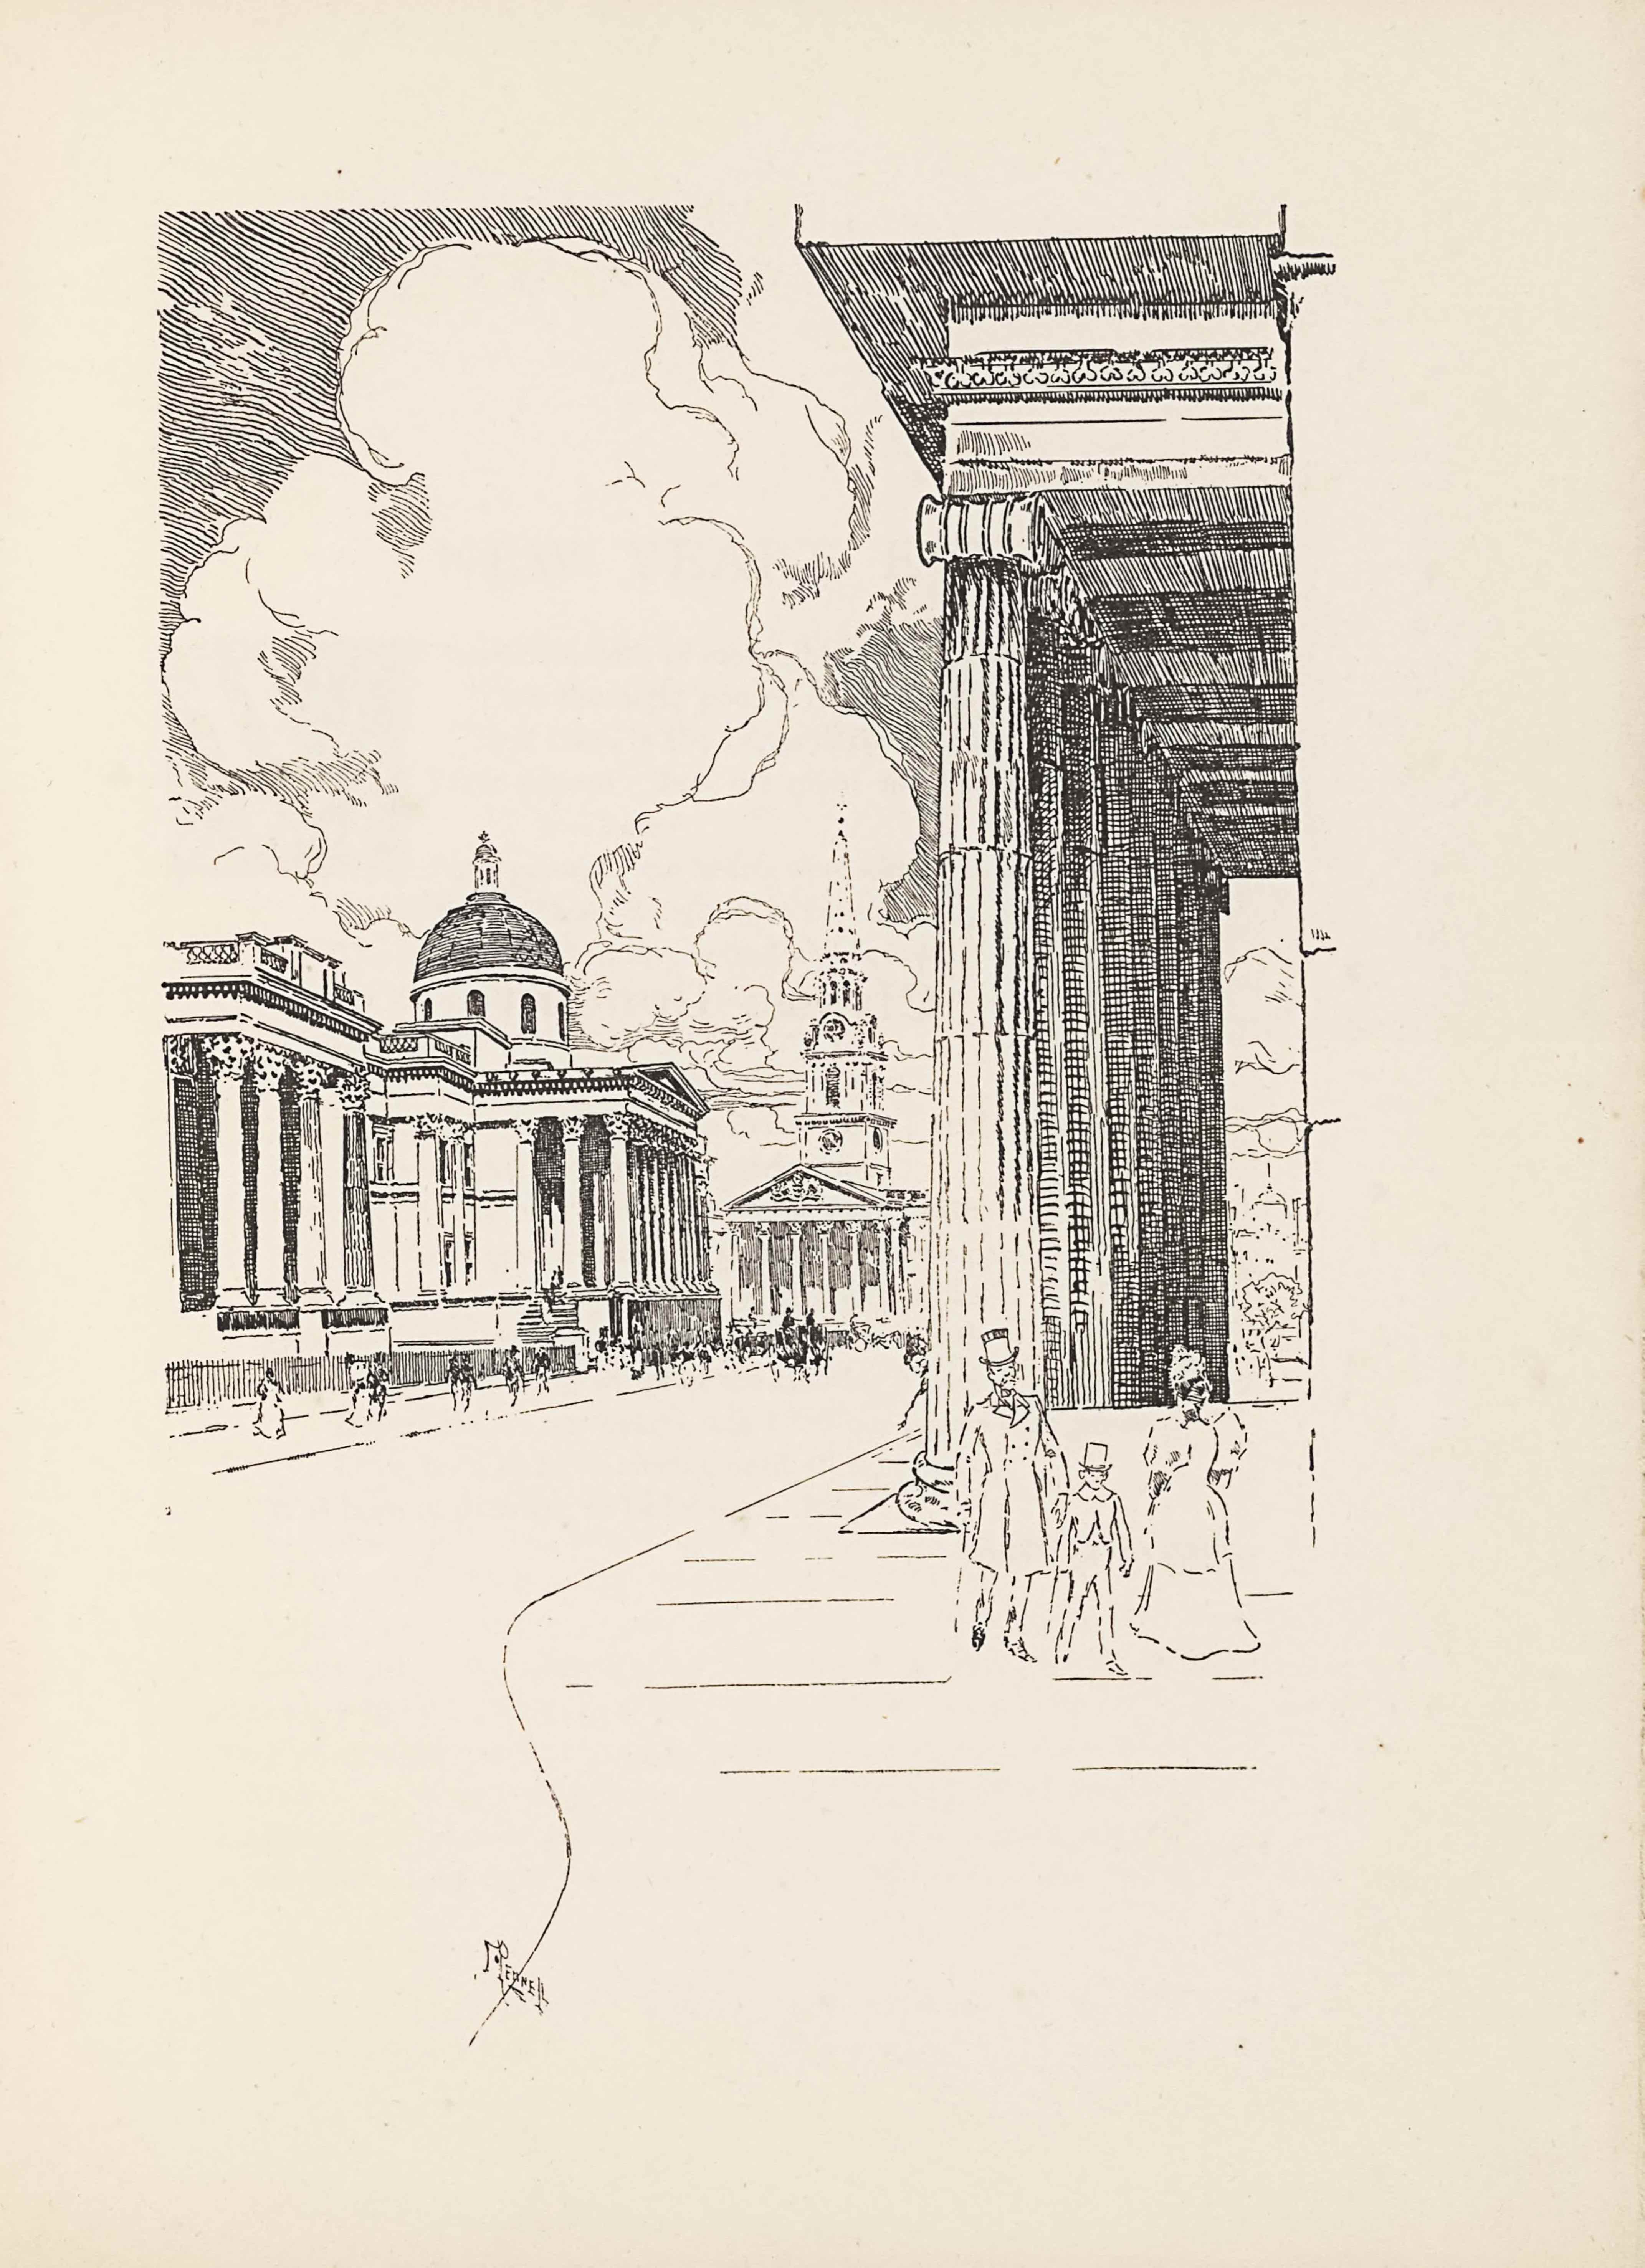 The line block image is in portrait orientation. The viewer stands at street level, looking from the sidewalk into the city of London toward the Dome of St Paul’s Cathedral. The foreground is cut into two sections: the road is pictured on the left third, and the sidewalk on the right two-thirds. The sidewalk has horizontal lines every few feet. A third of the way up the page, on the right-hand side, a man, child , and woman walk toward the viewer. The man, situated on the left of this group, is wearing a top hat and a long double-breasted overcoat that falls to just below his knees. He is mid-step and has his chest puffed forward with his hands out slightly from his body. The boy beside him on the right is half his height, also wearing a top hat, and cut-away coat and pants. The woman to the right is wearing a floor-length dress with puffy sleeves that end at her elbow. She is wearing a hat. Behind these three figures on the right side of the page is the profile of a large building with eight tall pillars holding up a roof that juts out over the sidewalk. The roof is partially visible at the top edge of the page, and the building itself is outside the frame on the right side of the page. Looking straight through the space between the pillars at the building front, the buildings at the end of the street are visible. The road is empty and free of any vehicles. In the far distance, a coach and horses appear on the road, headed off into the distance. In the mid-ground on the left side of the page is another pillared building, but this one looks much smaller because of perspective. The pillars hold up a roof that extends further out to the road in some spots, and at the base of the pillars is an elevation that is raised above the ground at least double the height of a person. The building has a sidewalk in front of it and on the sidewalk groups of people gather, walking towards the distance. In the distance on the left side of the page a dome protrudes above the roof of the pillared building. In the central background is a church steeple with six pillars holding up an A-line roof at the front. The steeple has an extremely tall and pointed column rising up from the middle, above two stacked square rooms that are smaller than the main building. On the front of the bottom stacked room is a clock face that appears just above the A-line roof. Above the clock face, in the second stacked room is a large front-facing window. Just above the window is a circular windowed room. On top of the stacked rooms is the pointed extension of a column, topped by a weathervane or cross. The sky behind the city scape has huge clouds blooming up and out. In the very foreground, on the line separating sidewalk from road, is the artist’s signature: “PENNELL” [caps] with two lines underlining the partial text “ENNE” [caps] in the name.